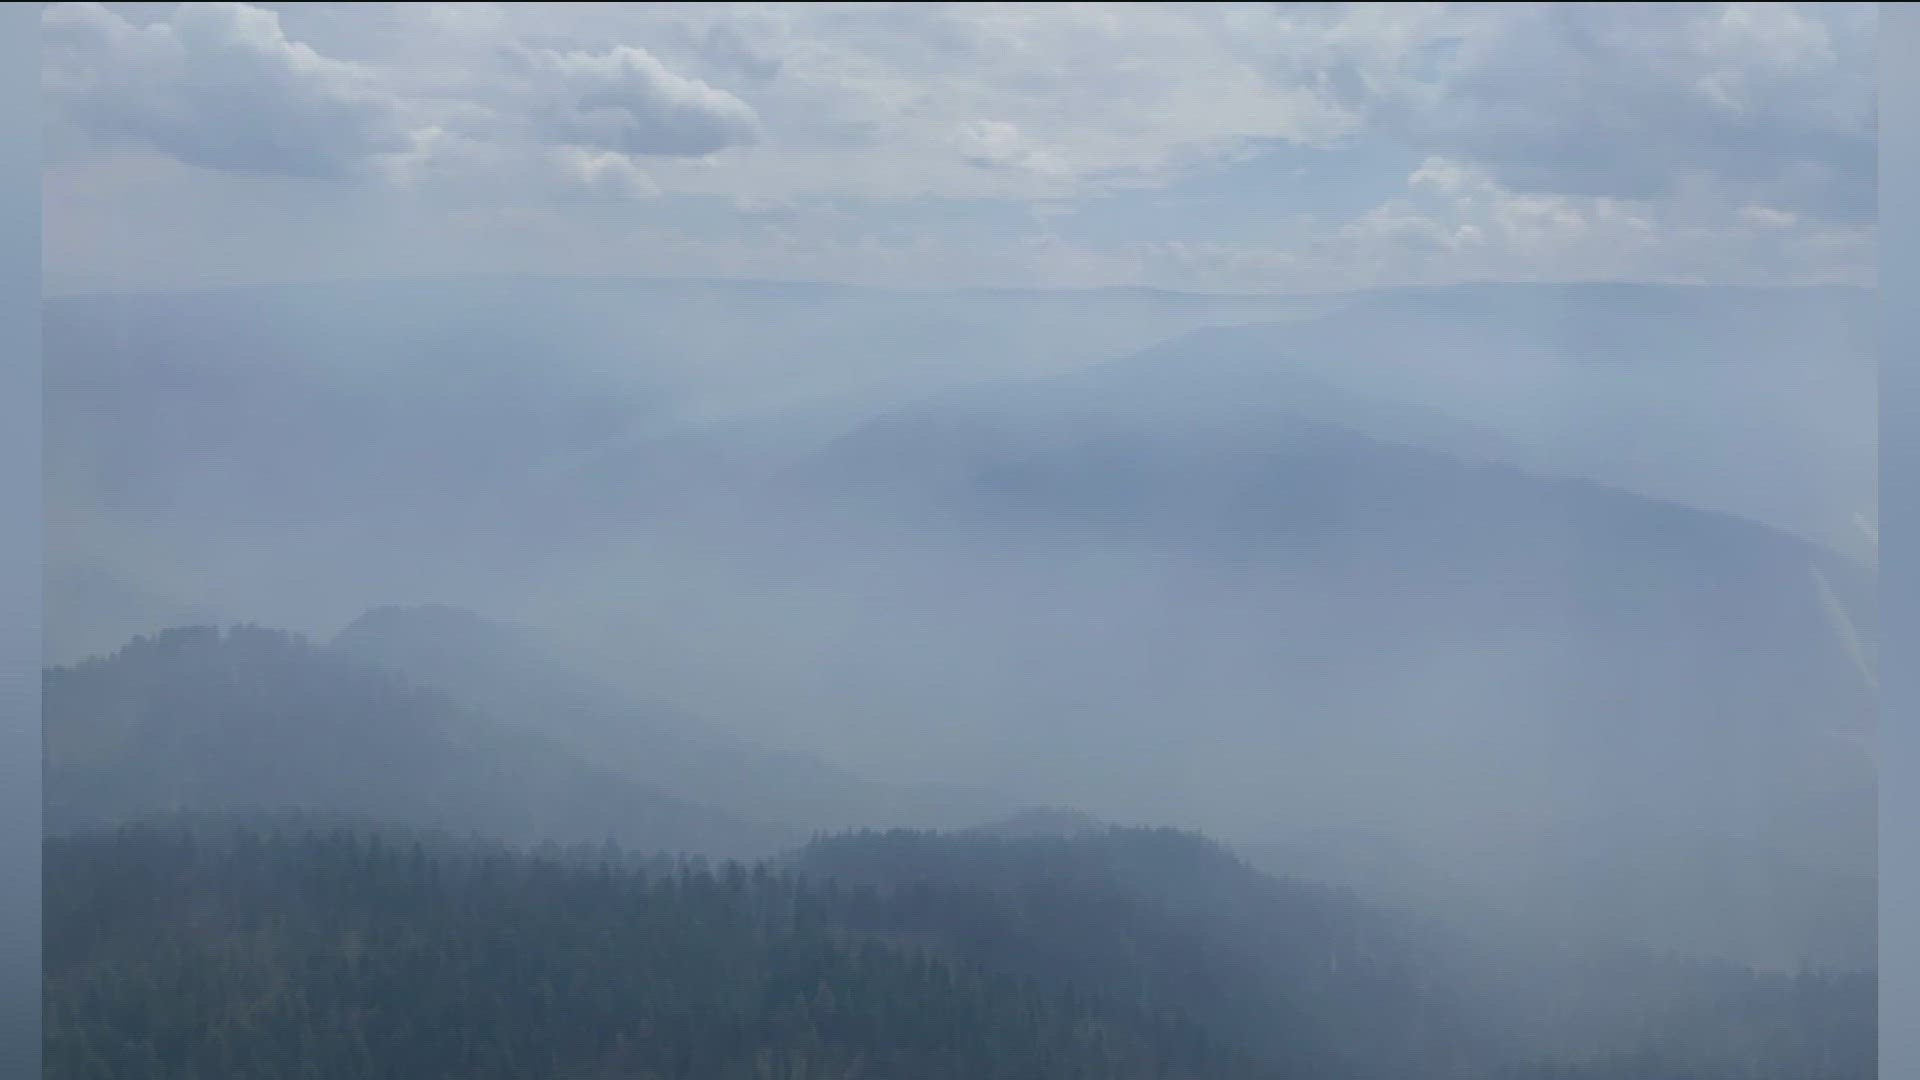 The Elkhorn Fire has burned over 26,000 acres as of Thursday. The fire is 45% contained - up from 12% one week ago.